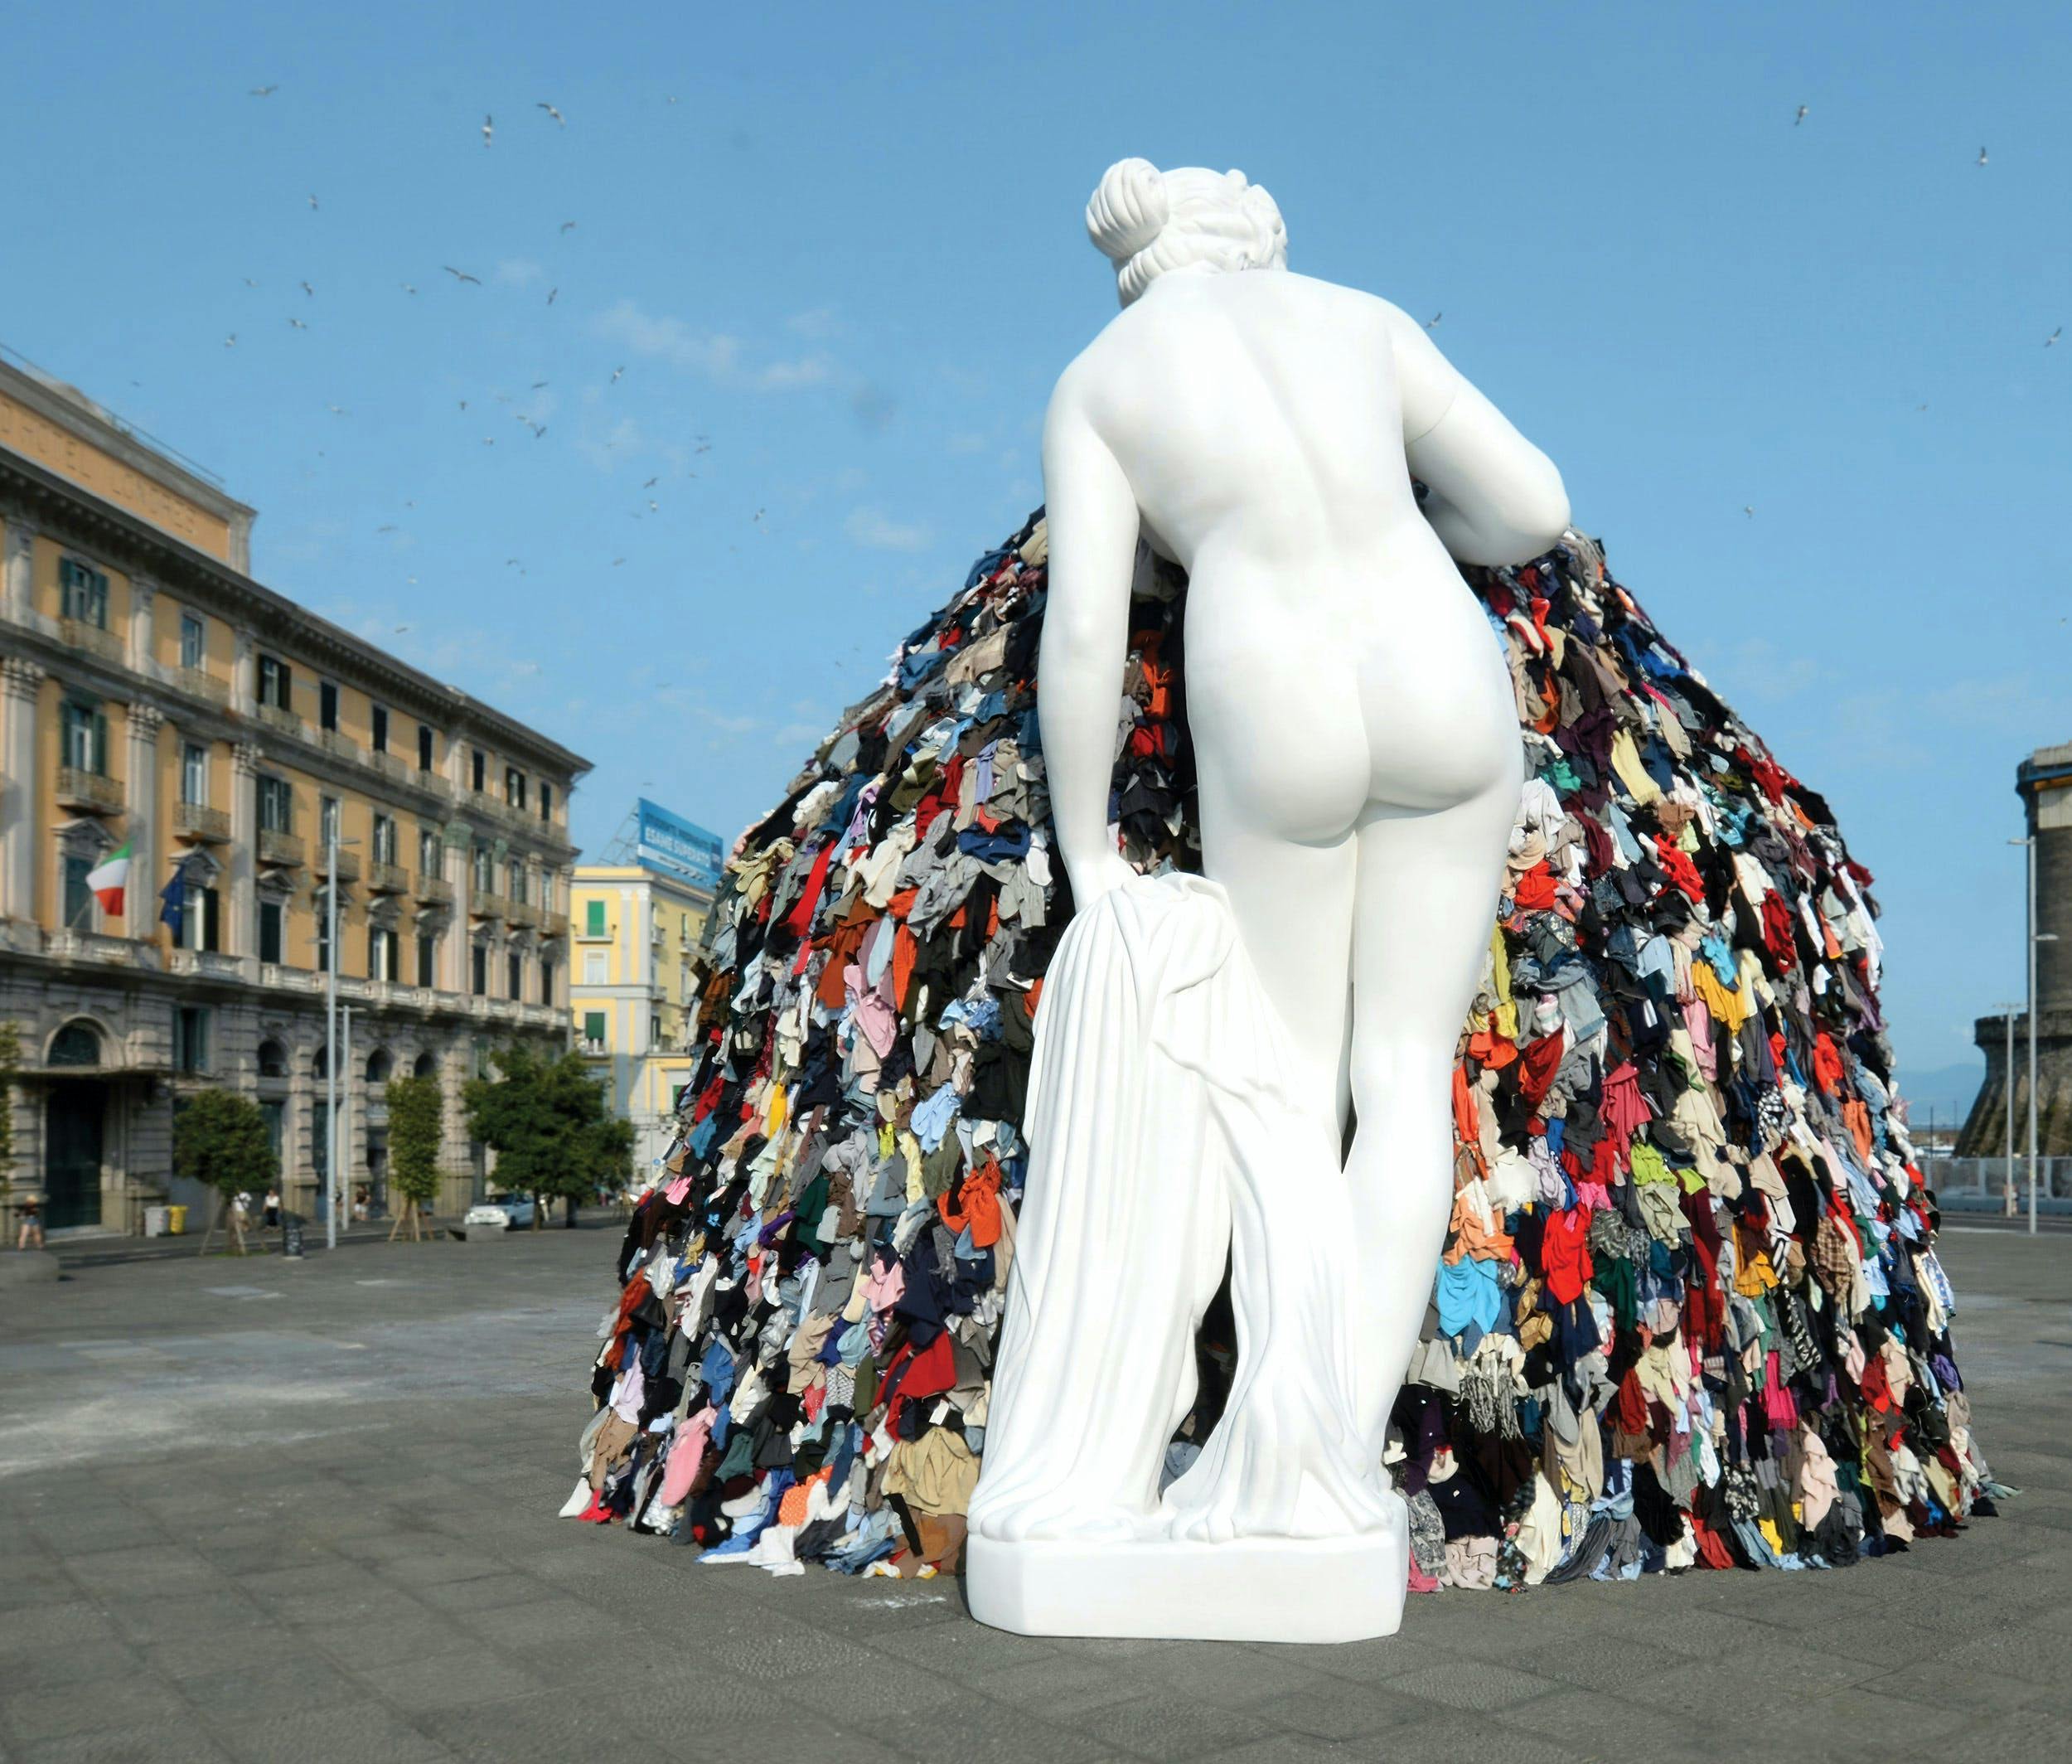 Art installation, rags, colorful, artist installation in Italy